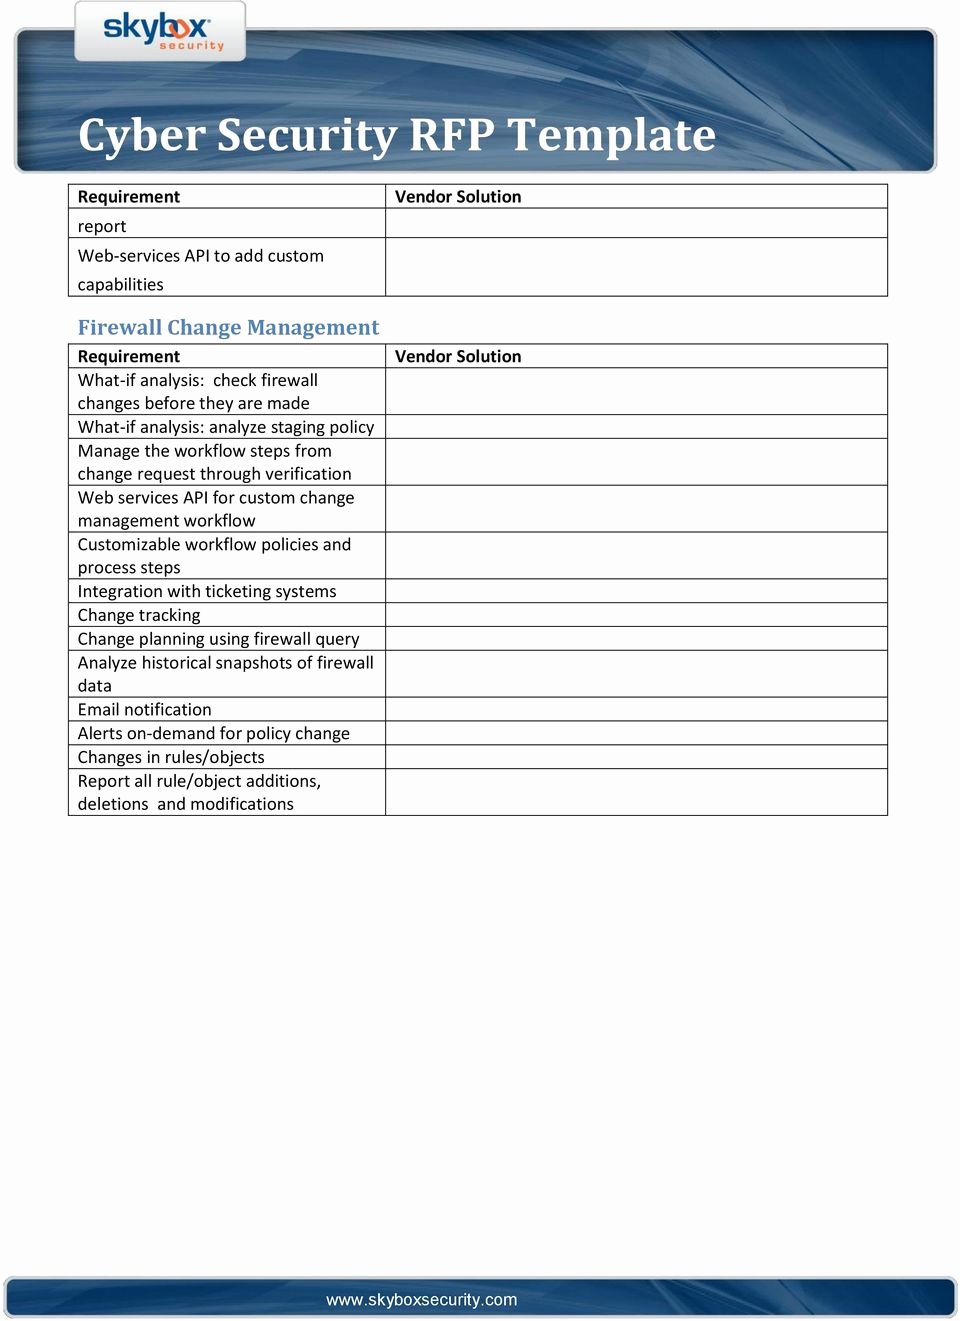 Cyber Security Plan Template Beautiful Cyber Security Rfp Template Pdf